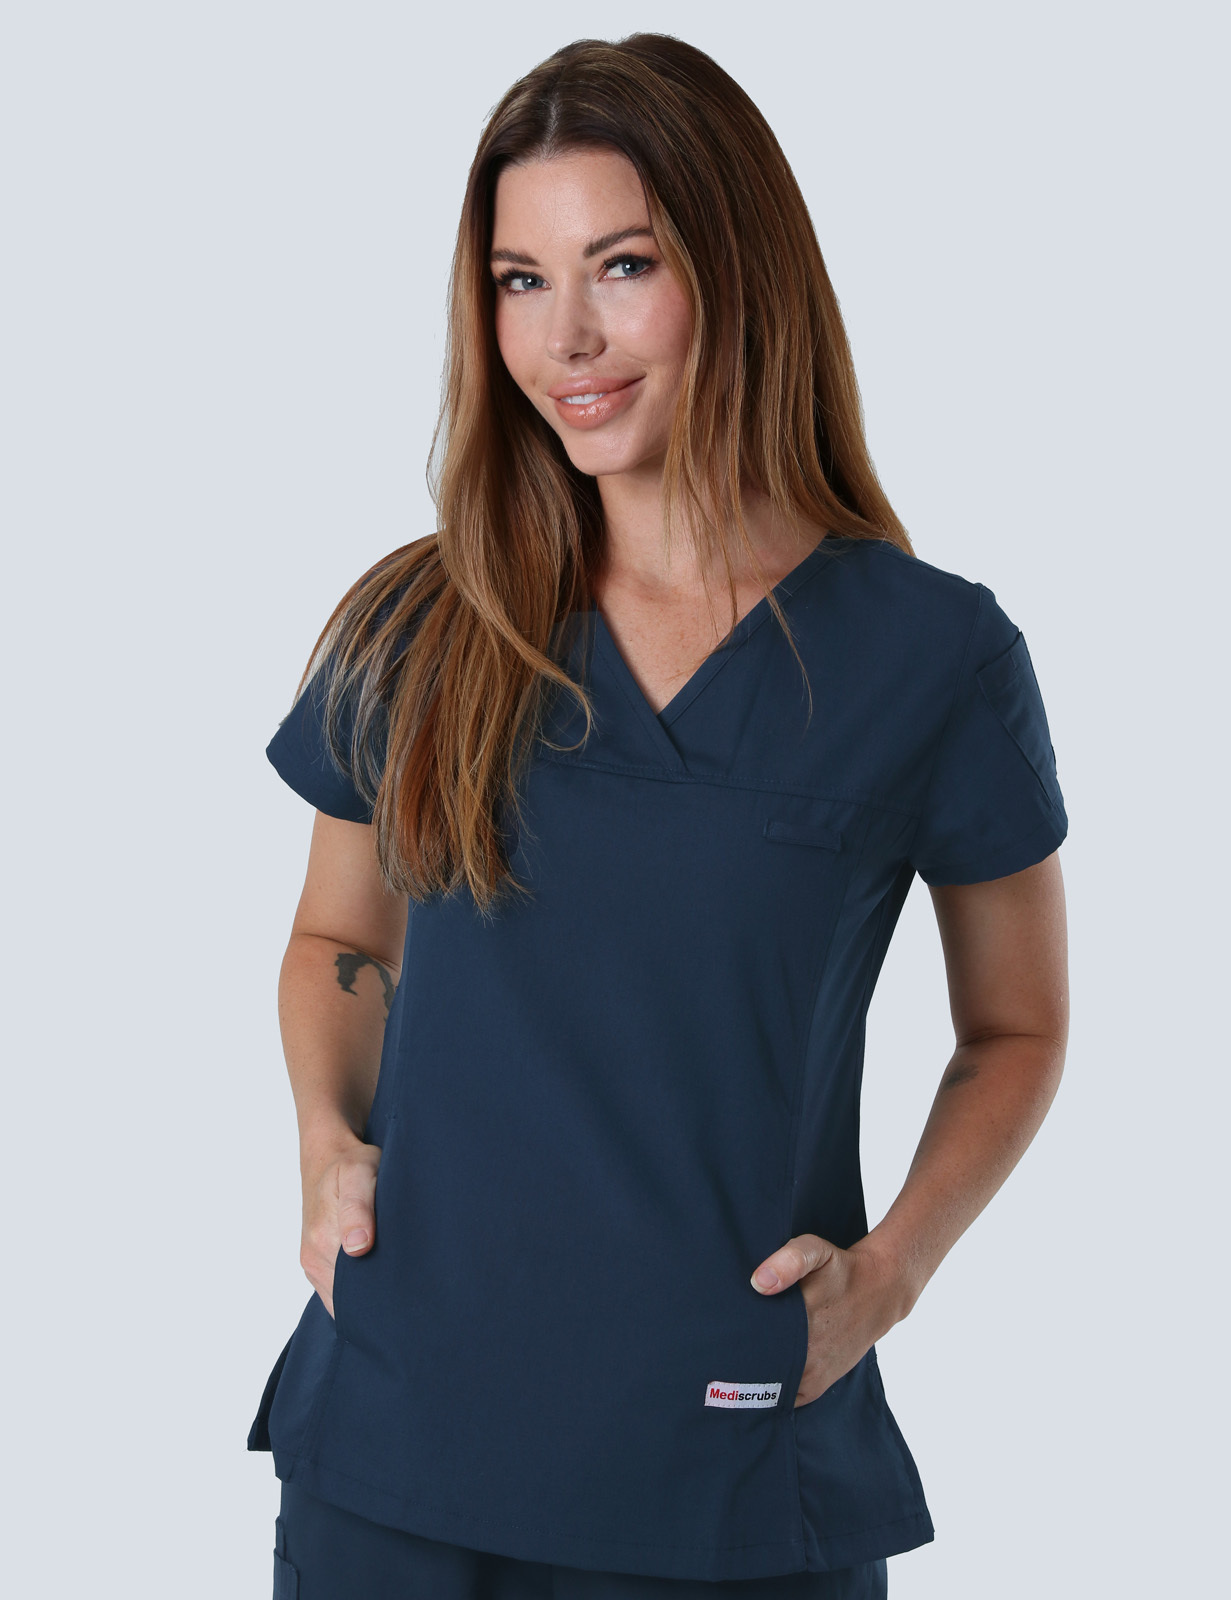 Rockhampton Base Hospital - ED DR (Women's Fit Solid Scrub Top and Cargo Pants in Navy incl Logos)